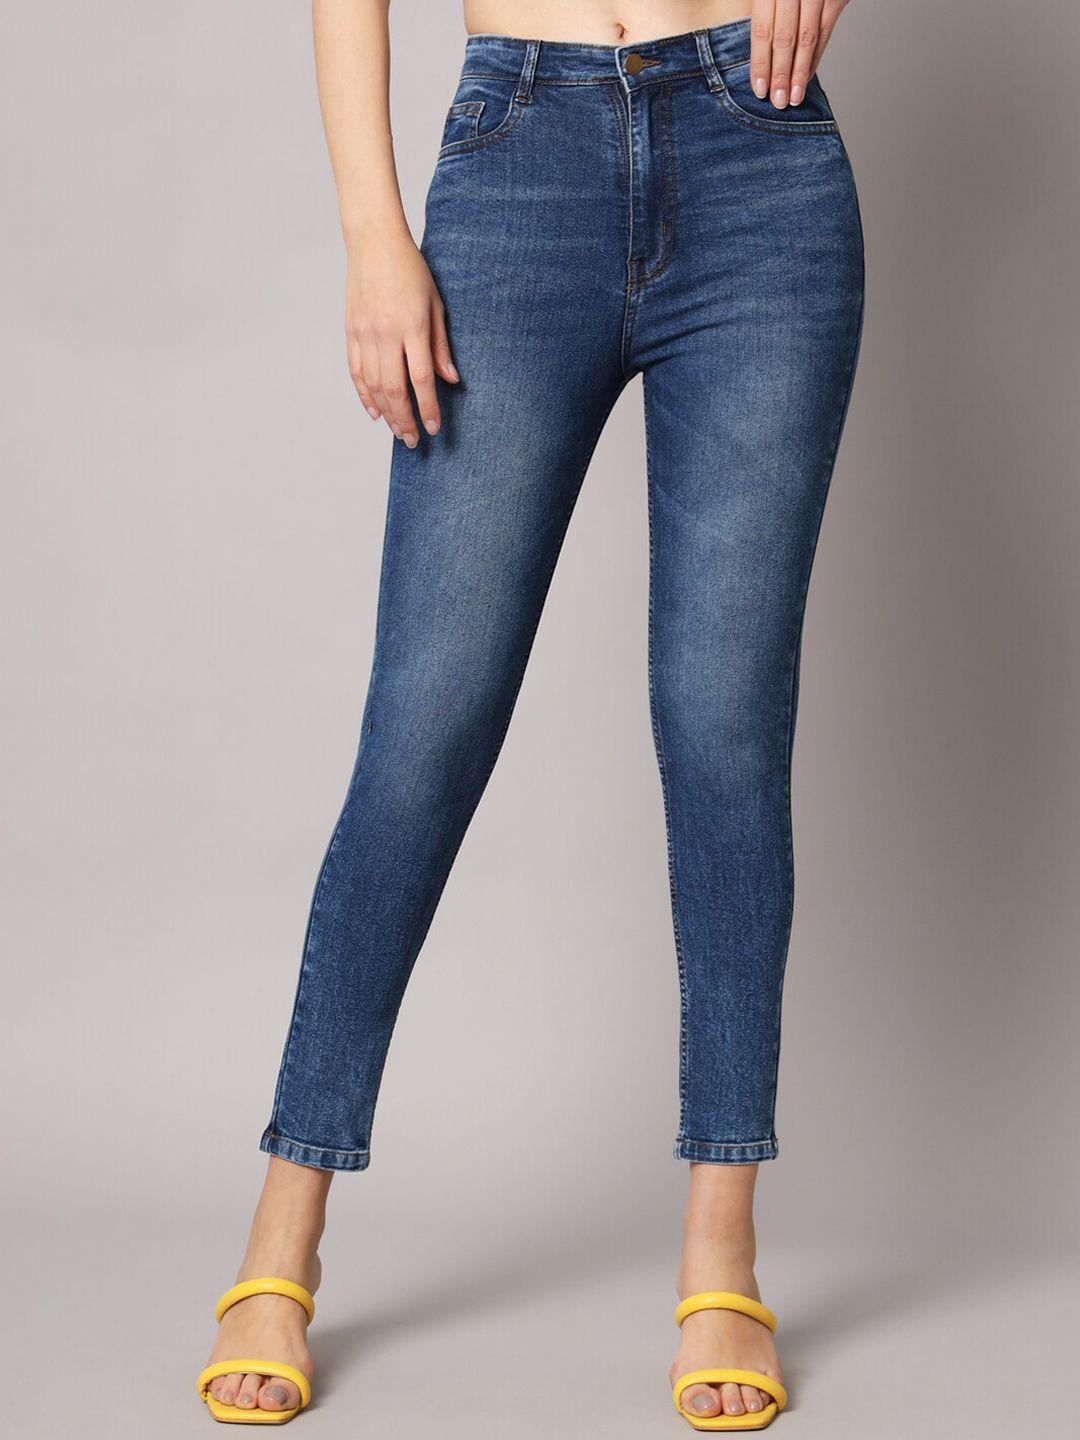 baesd-women-skinny-fit-high-rise-light-fade-stretchable-cropped-jeans